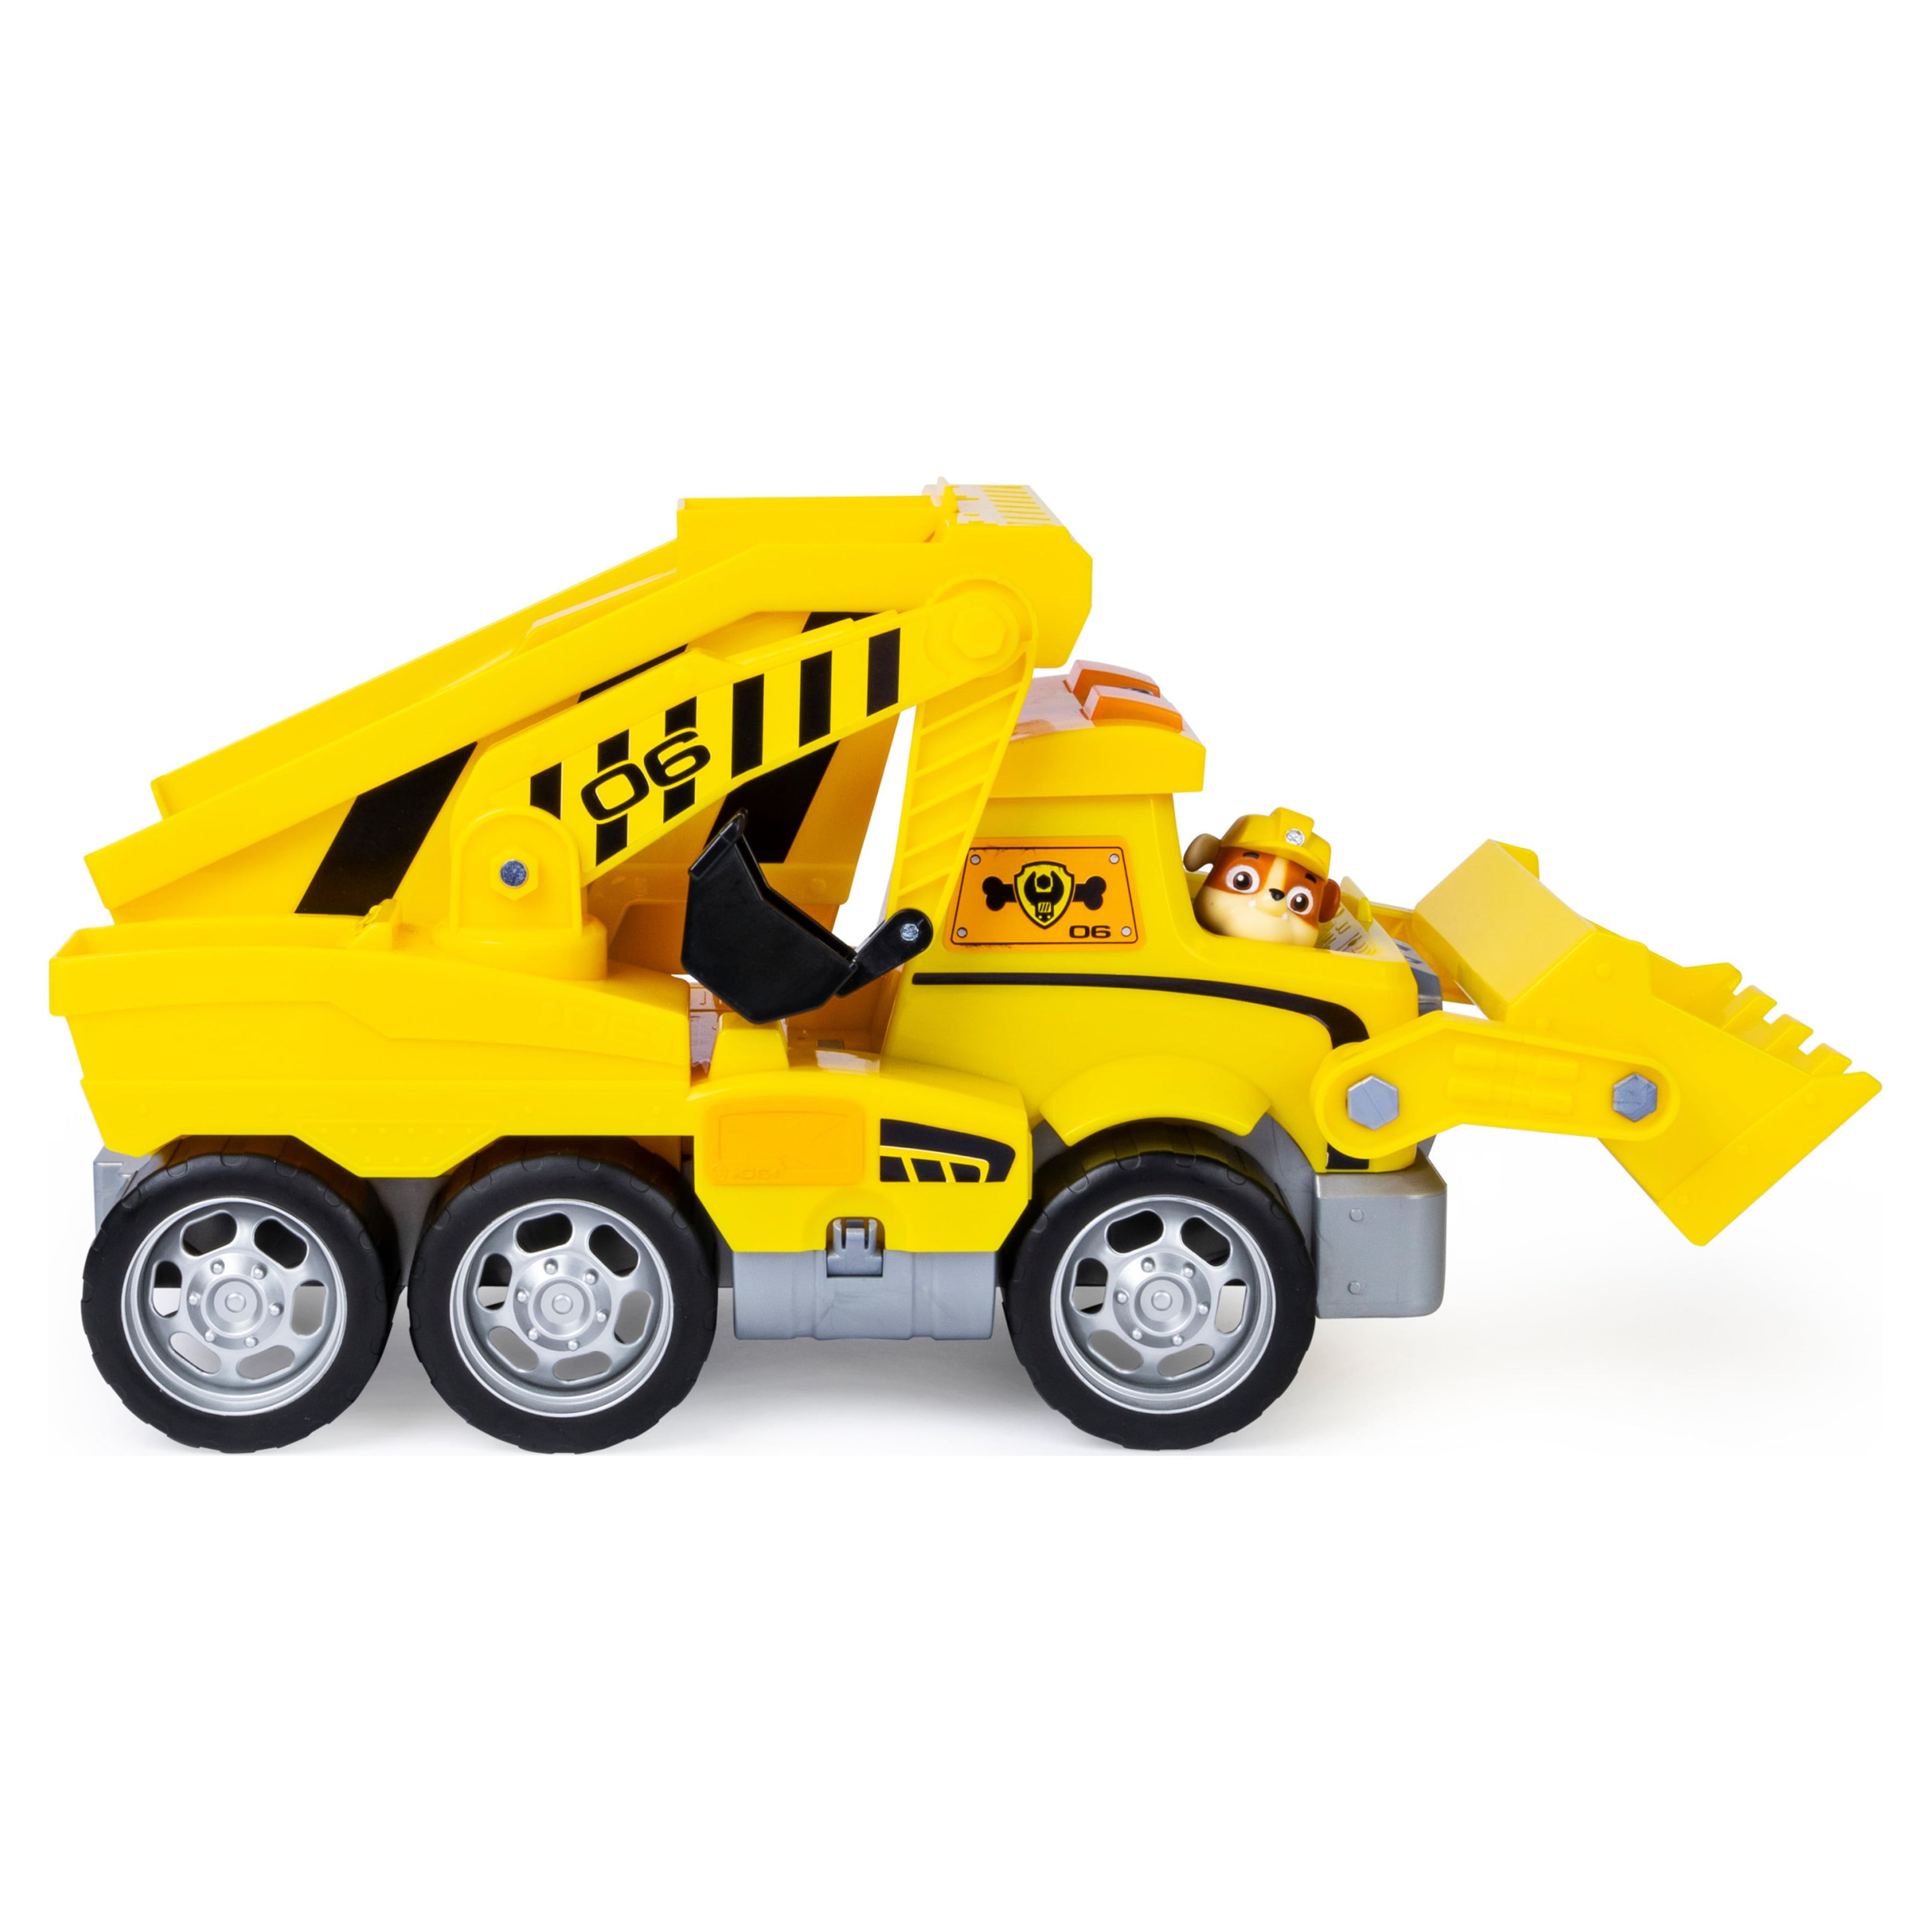 PAW Patrol, Rubble's Construction Truck with Mini Vehicle and Figure, For Ages 3 and up - image 4 of 8